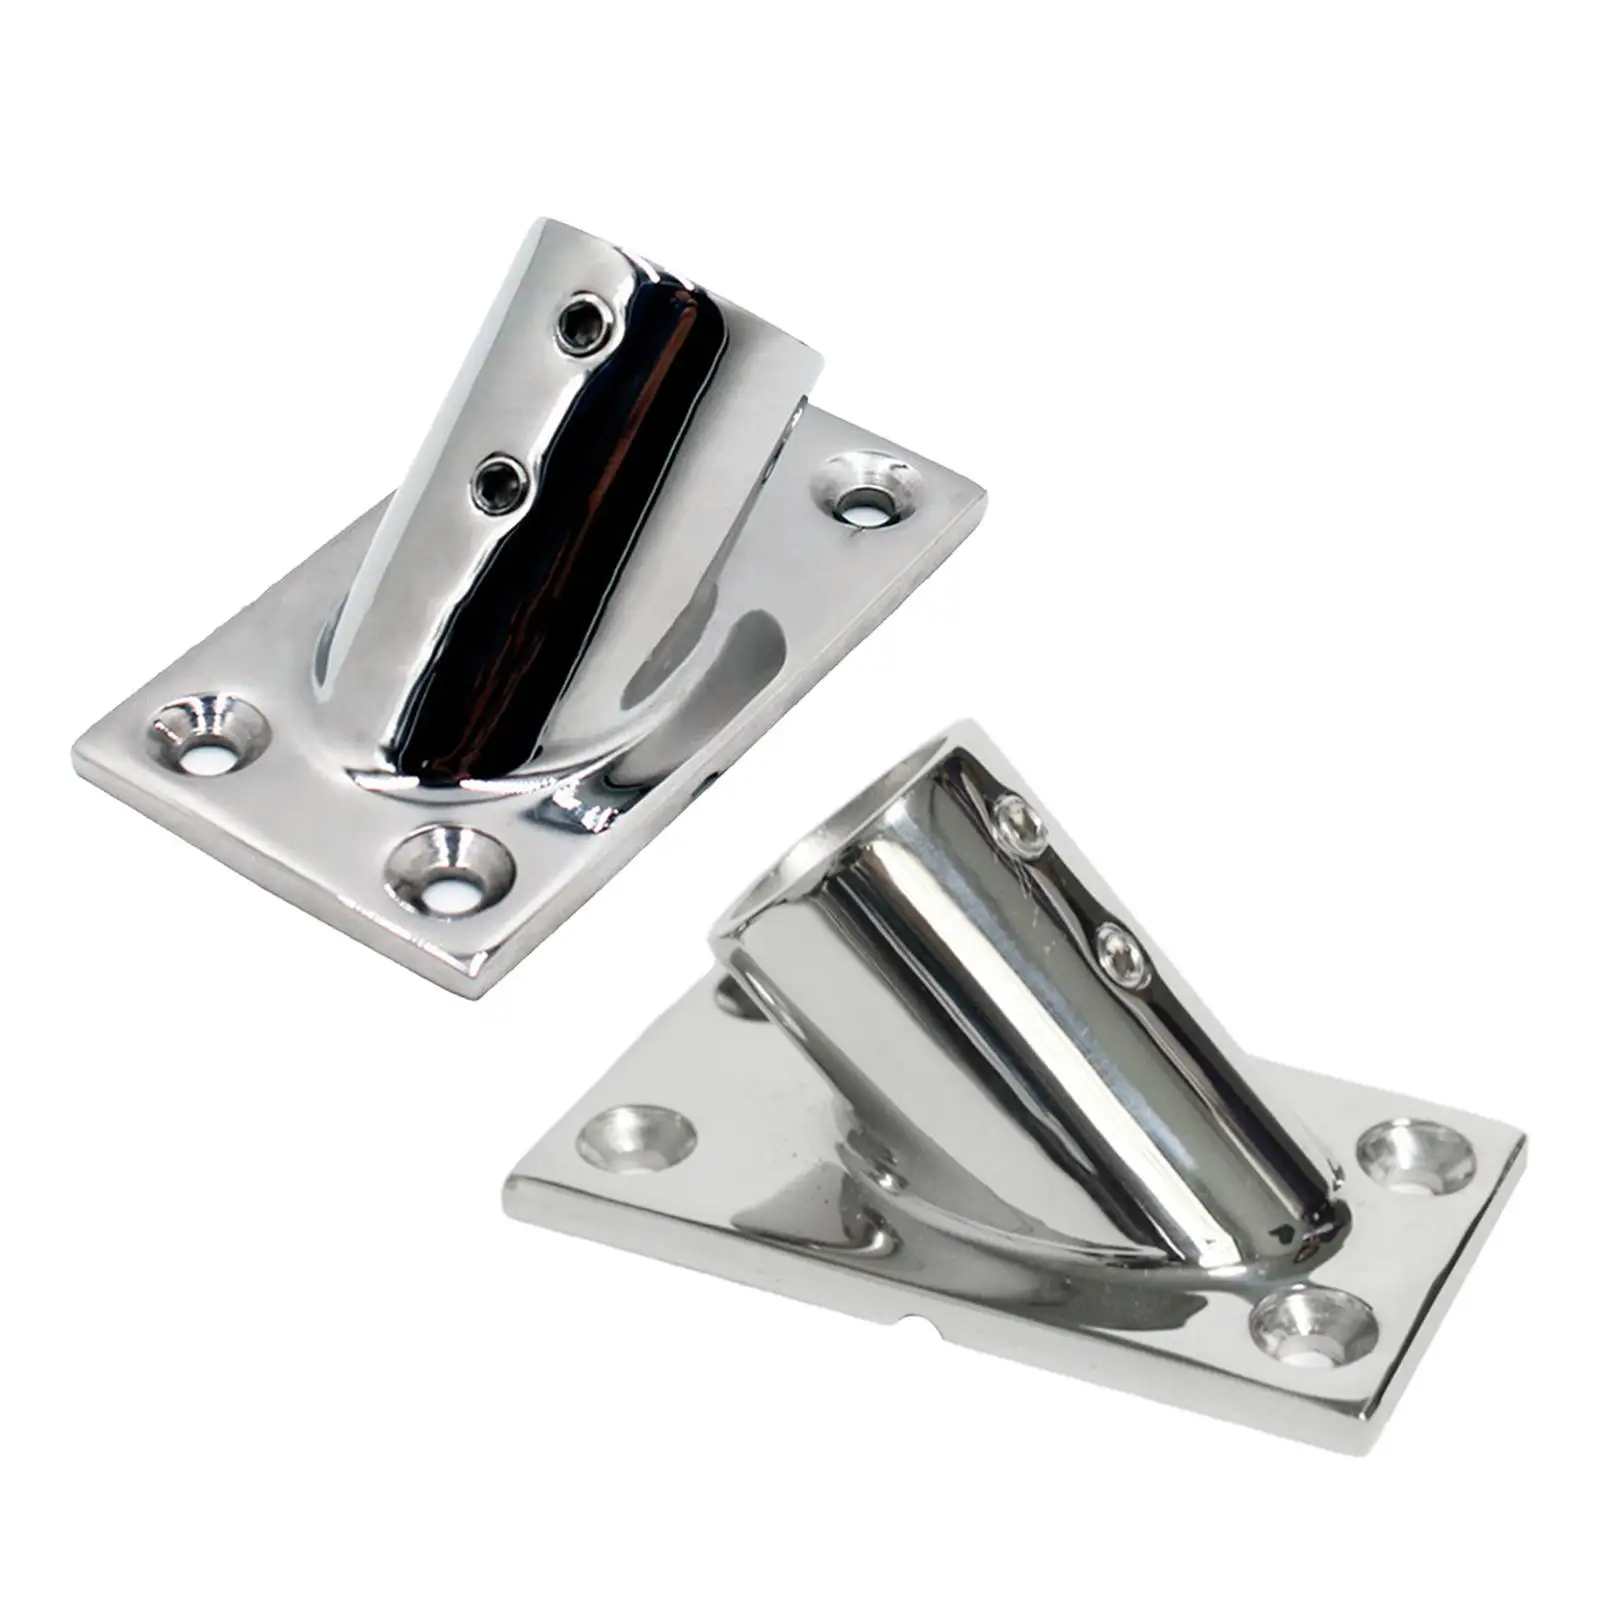 

45 Degree Boat Handrail Fitting Stainless Steel Rust-Proof Heavy Duty Hardware for Yachts Inflatable Boats Marine Boat Polished